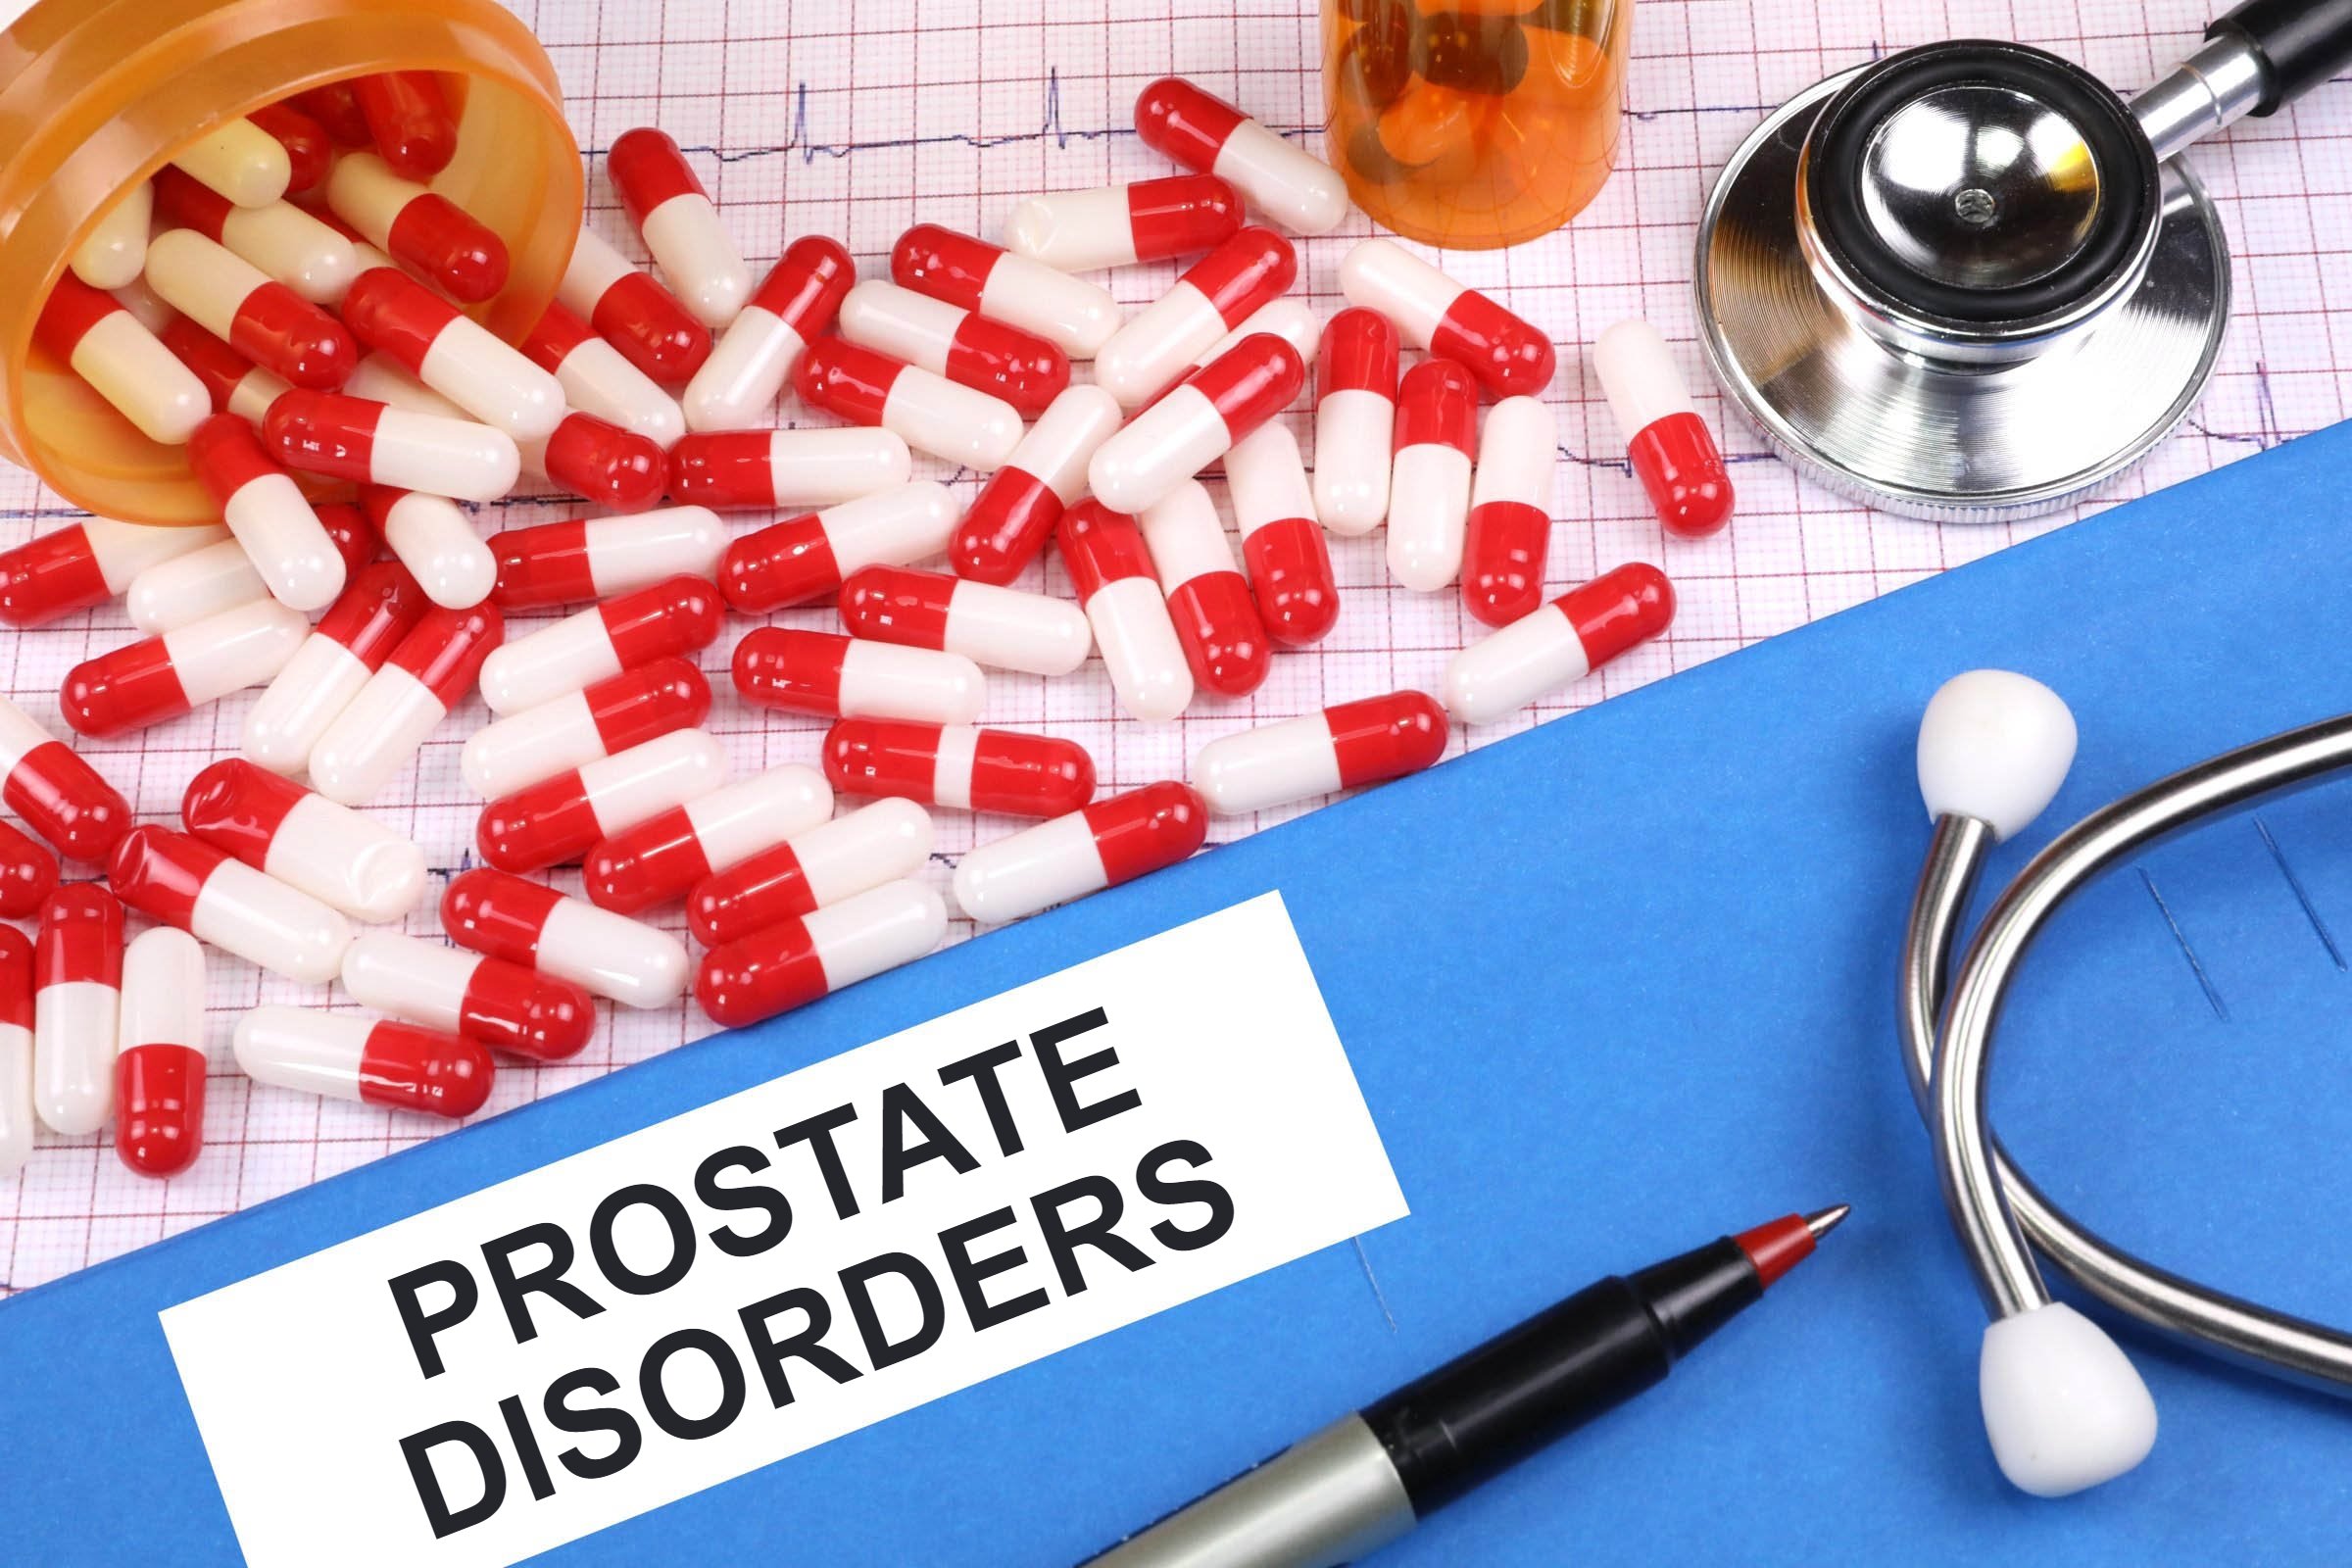 prostate disorders